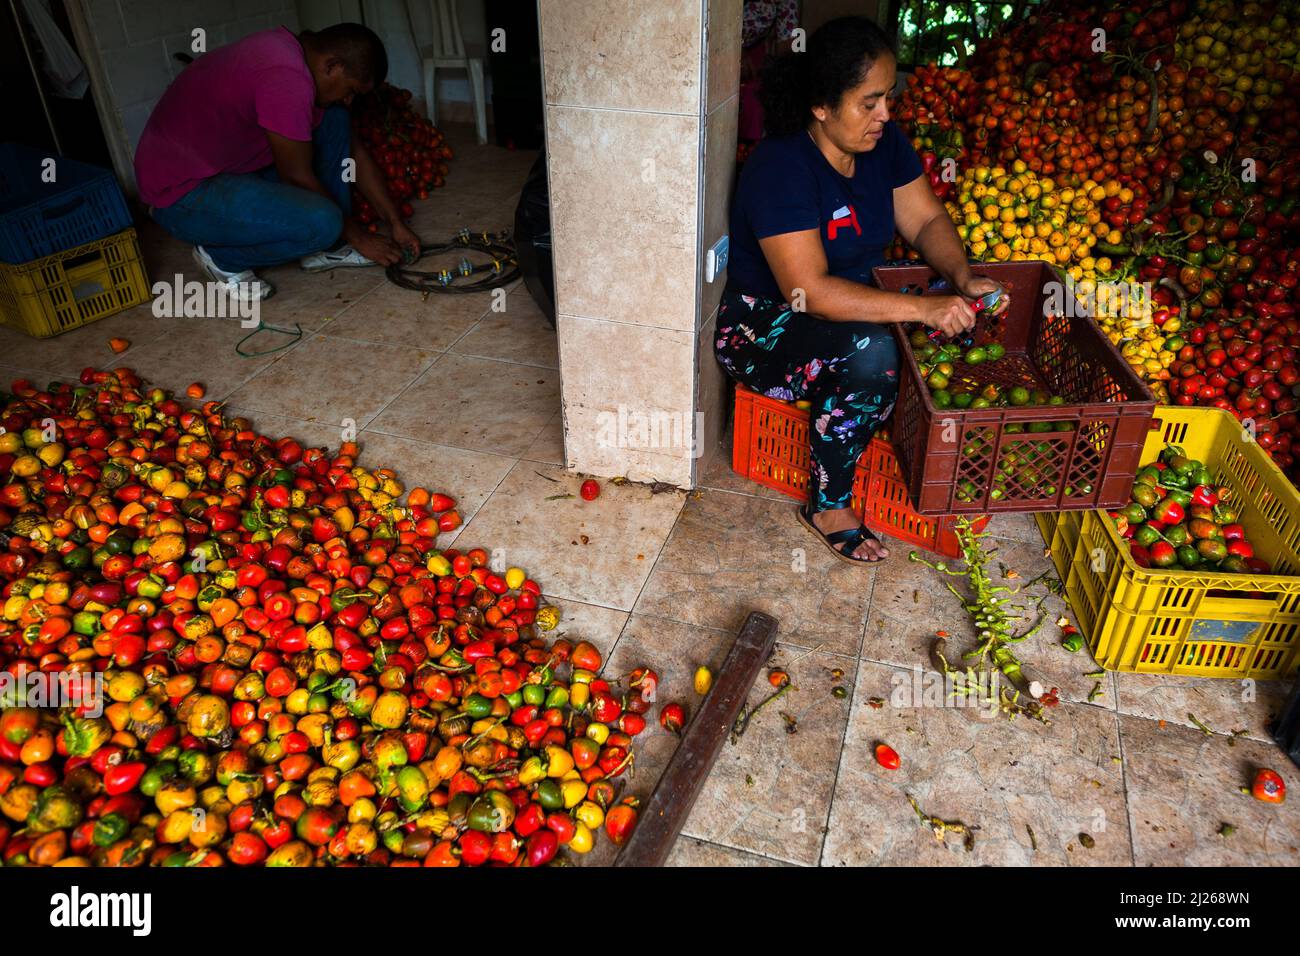 An Afro-Colombian woman cuts raw chontaduro (peach palm) fruits from the bunch in a processing facility in Cali, Valle del Cauca, Colombia. Stock Photo